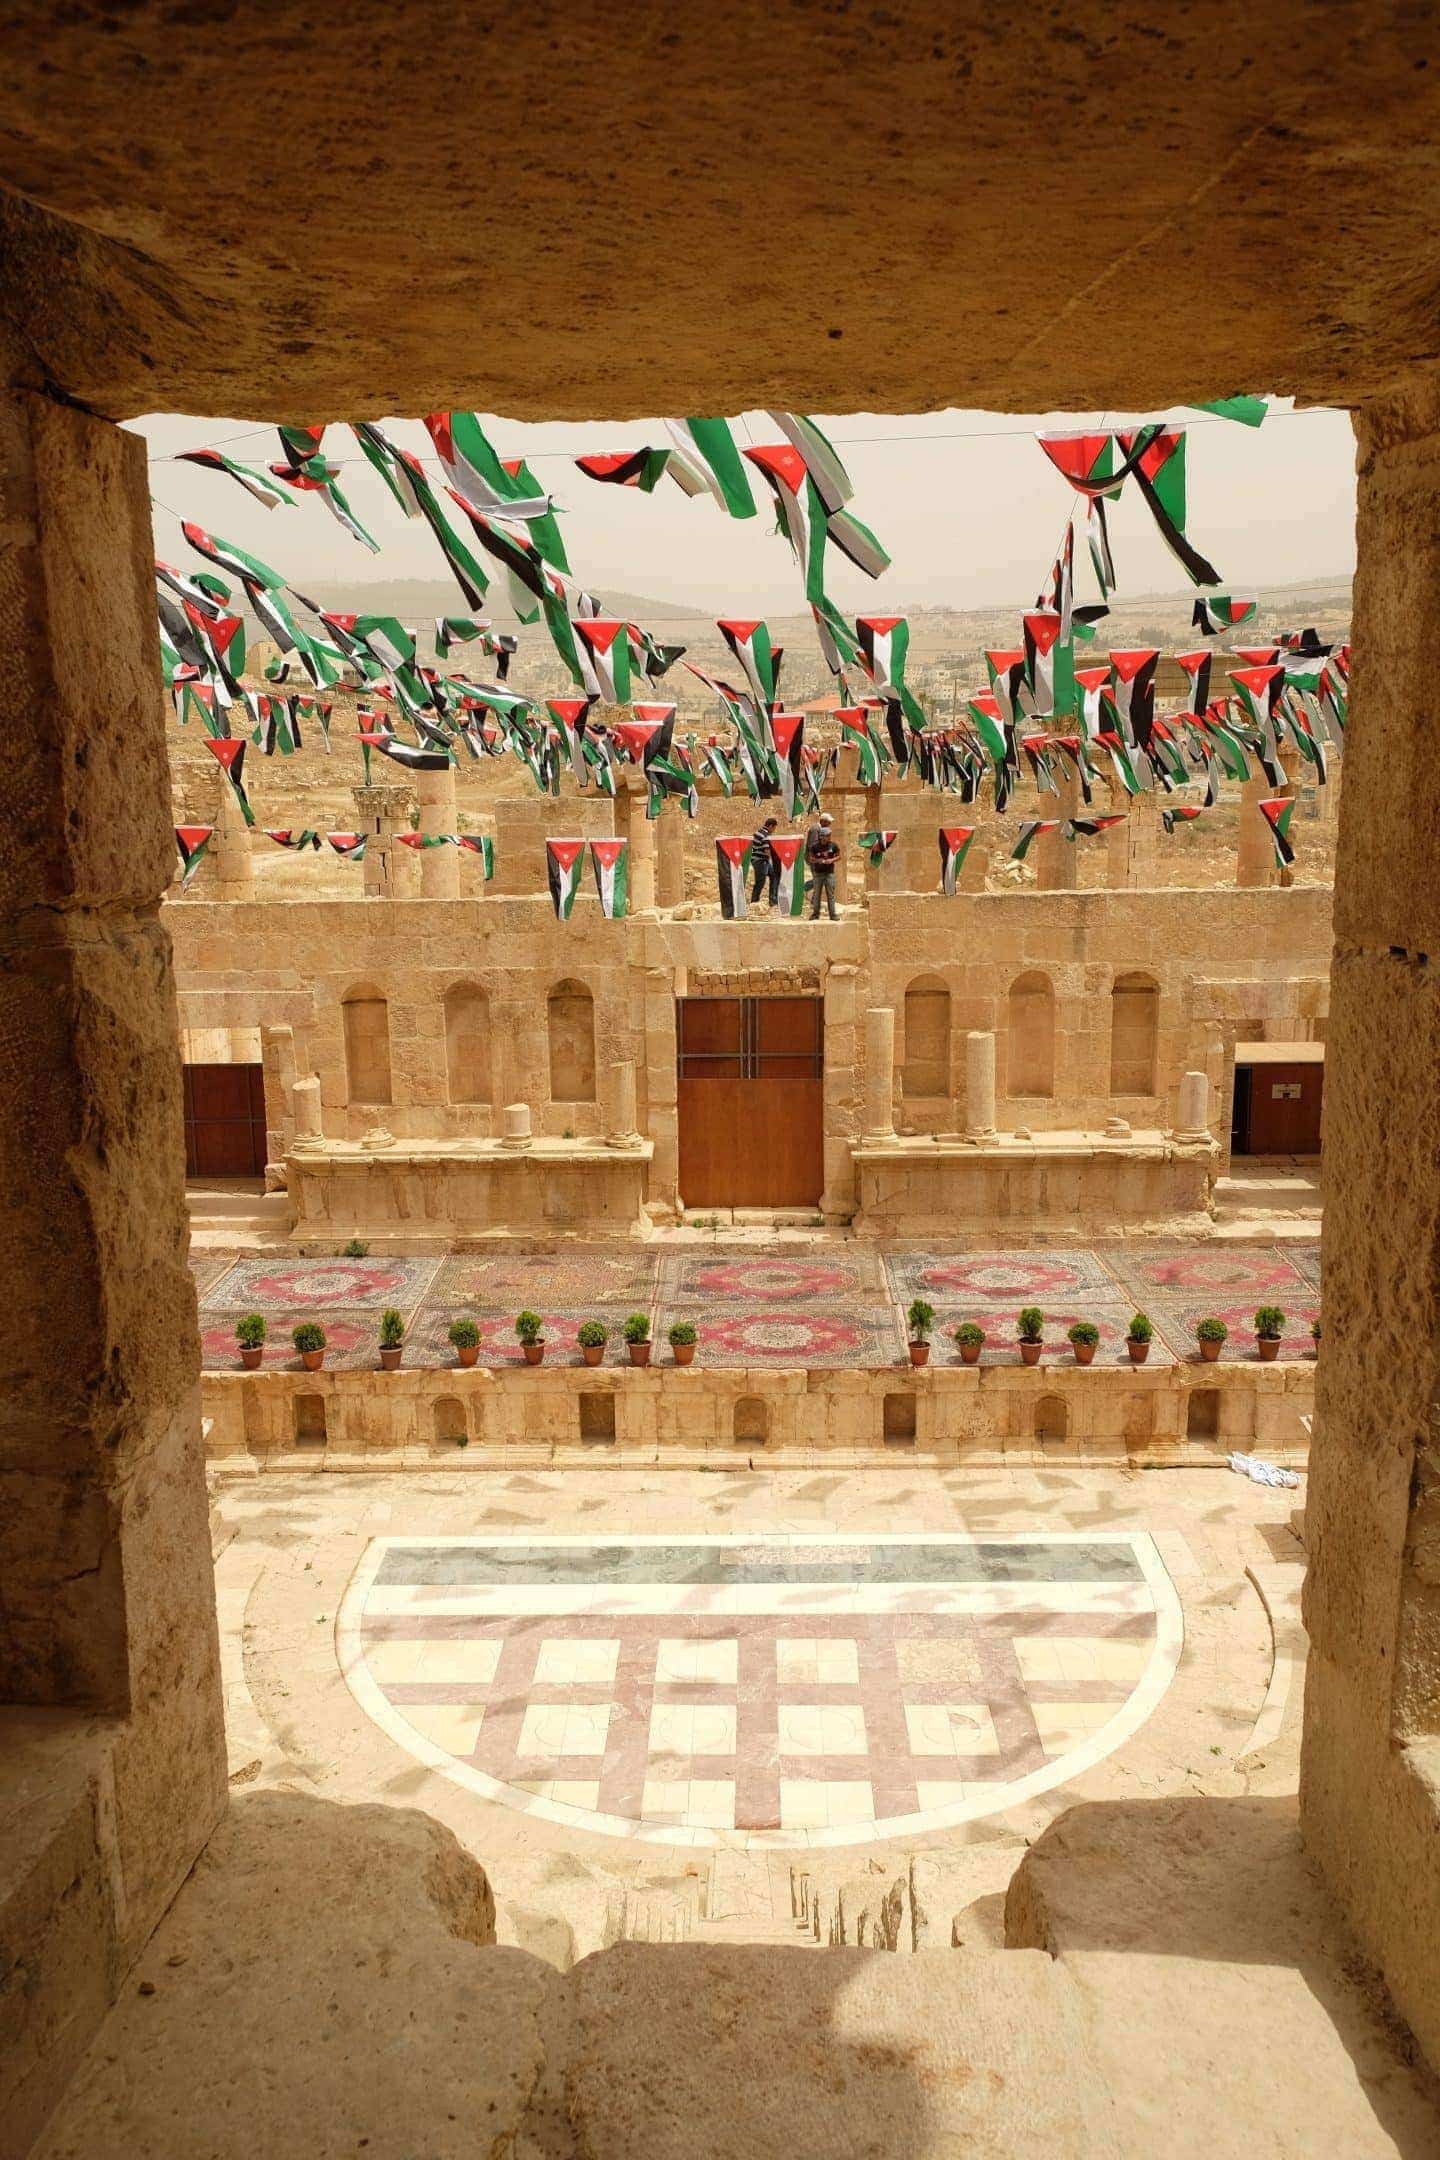 Second theatre decorated for a Jordanian holiday. Photo: Genevieve Hathaway Photography.